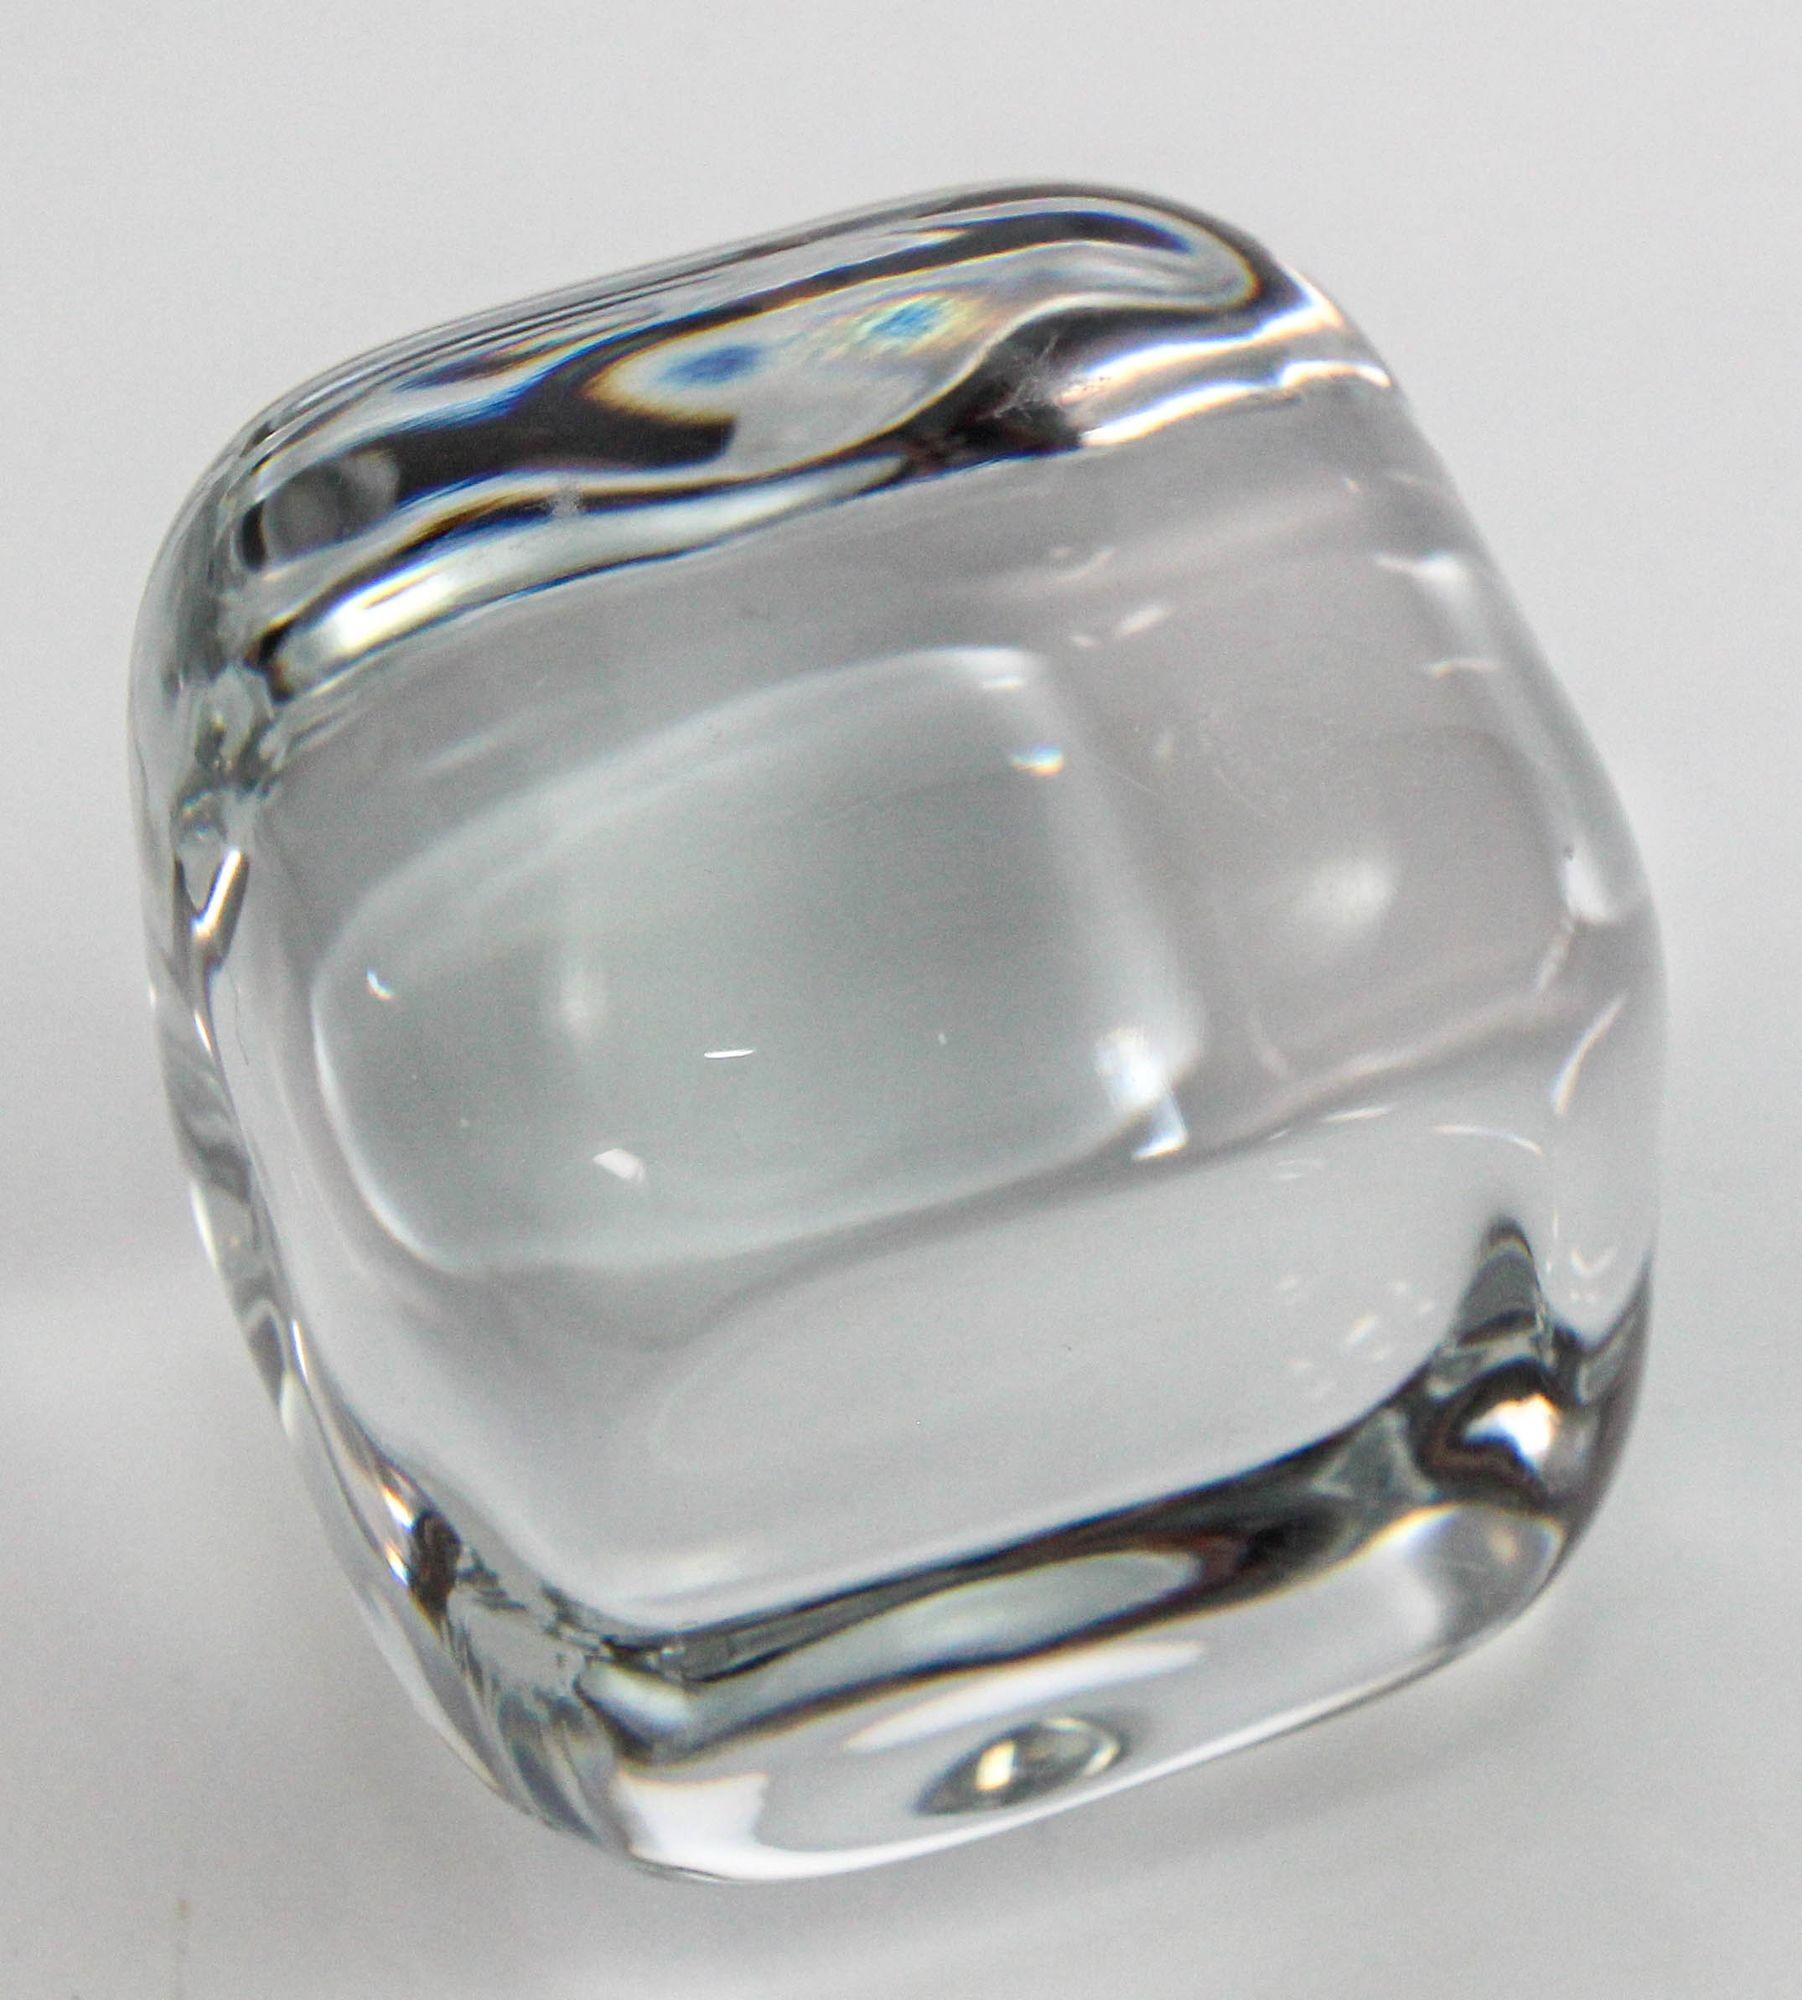 BACCARAT Clear Crystal Cube Paperweight.
Vintage Baccarat Crystal Glass Sculptural Paperweight or Desk Accessory.
From the French luxury crystal Maison Baccarat, a beautiful clear transparent cube paperweight or decorative object.
Acid stamped